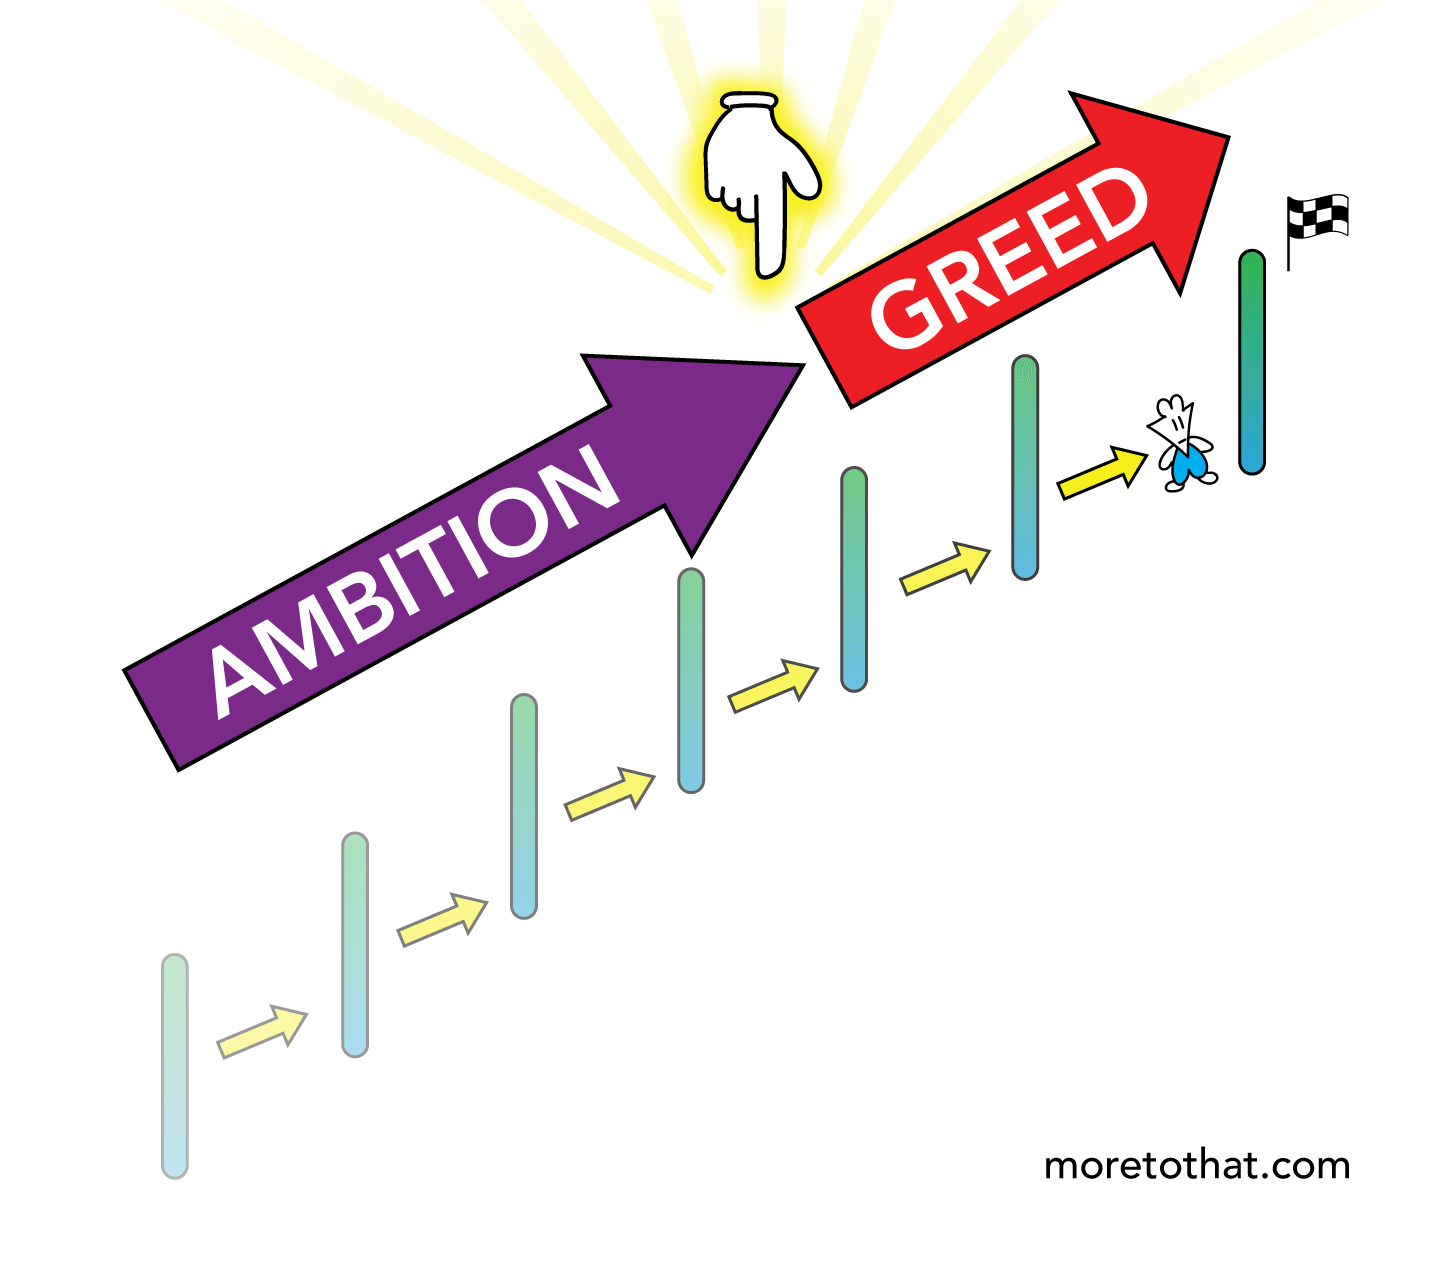 intersection point of ambition and greed - many worlds of enough